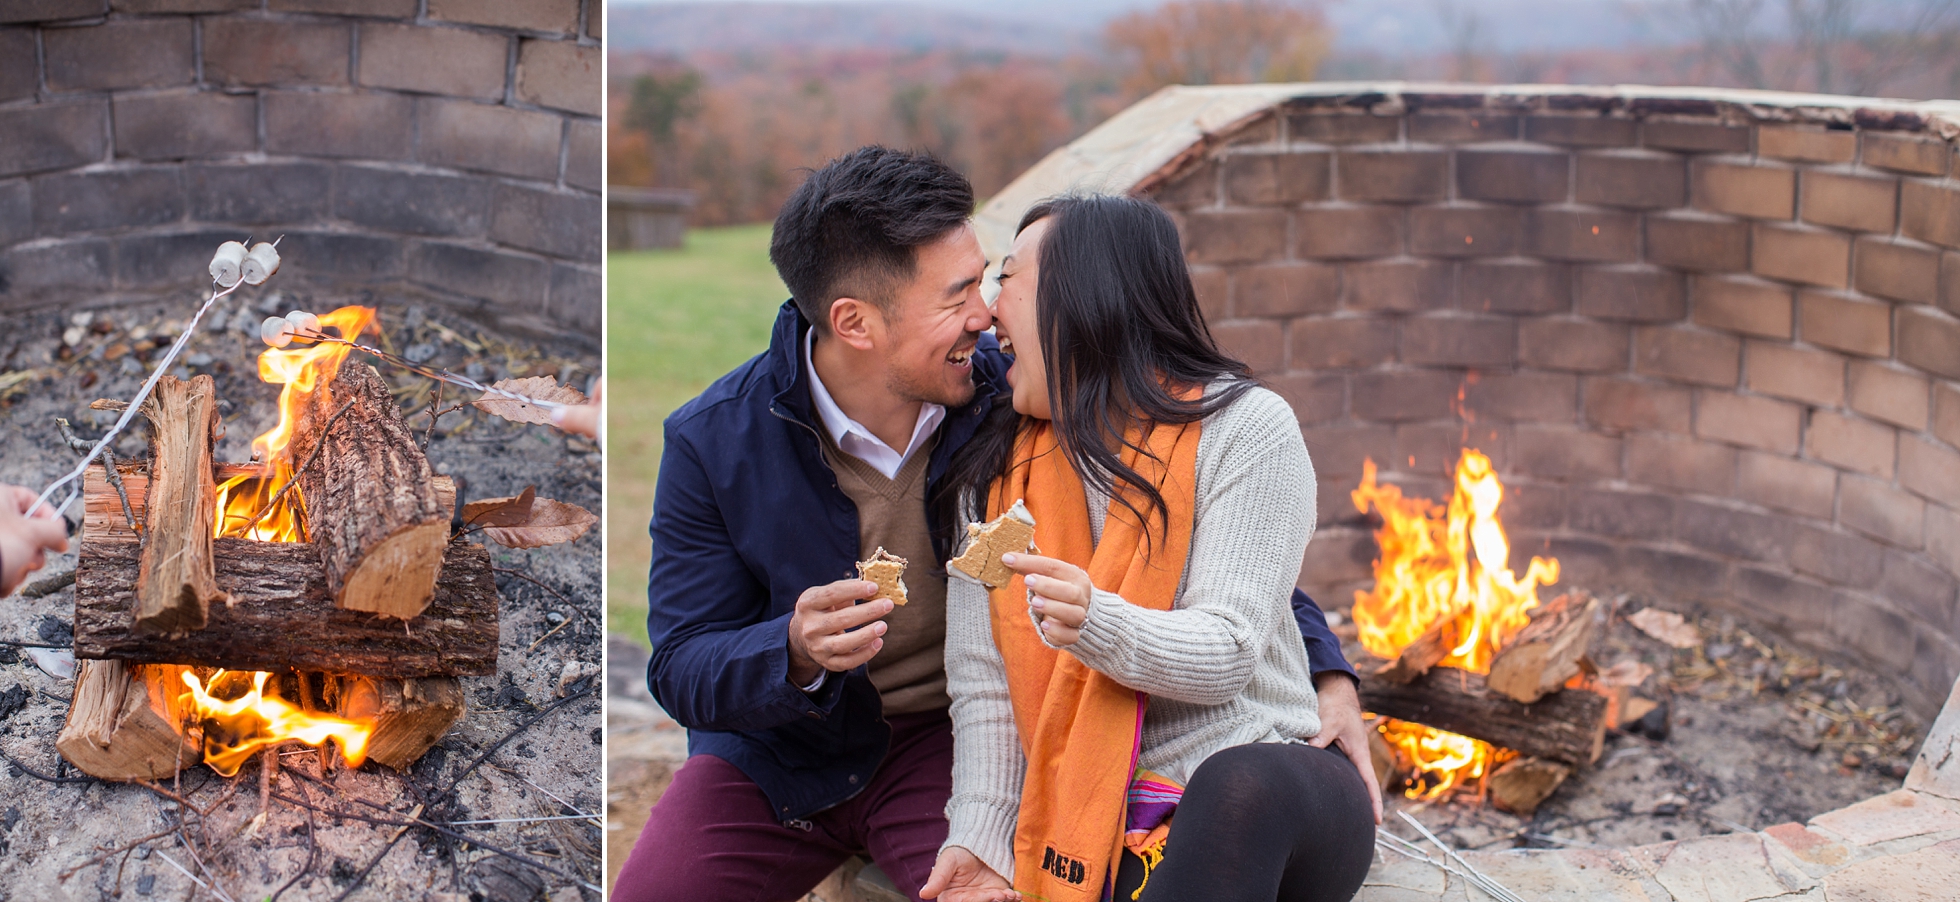 Claire Diana Photography | Fall Styled Engagement | Athens Wedding Photographer_0026